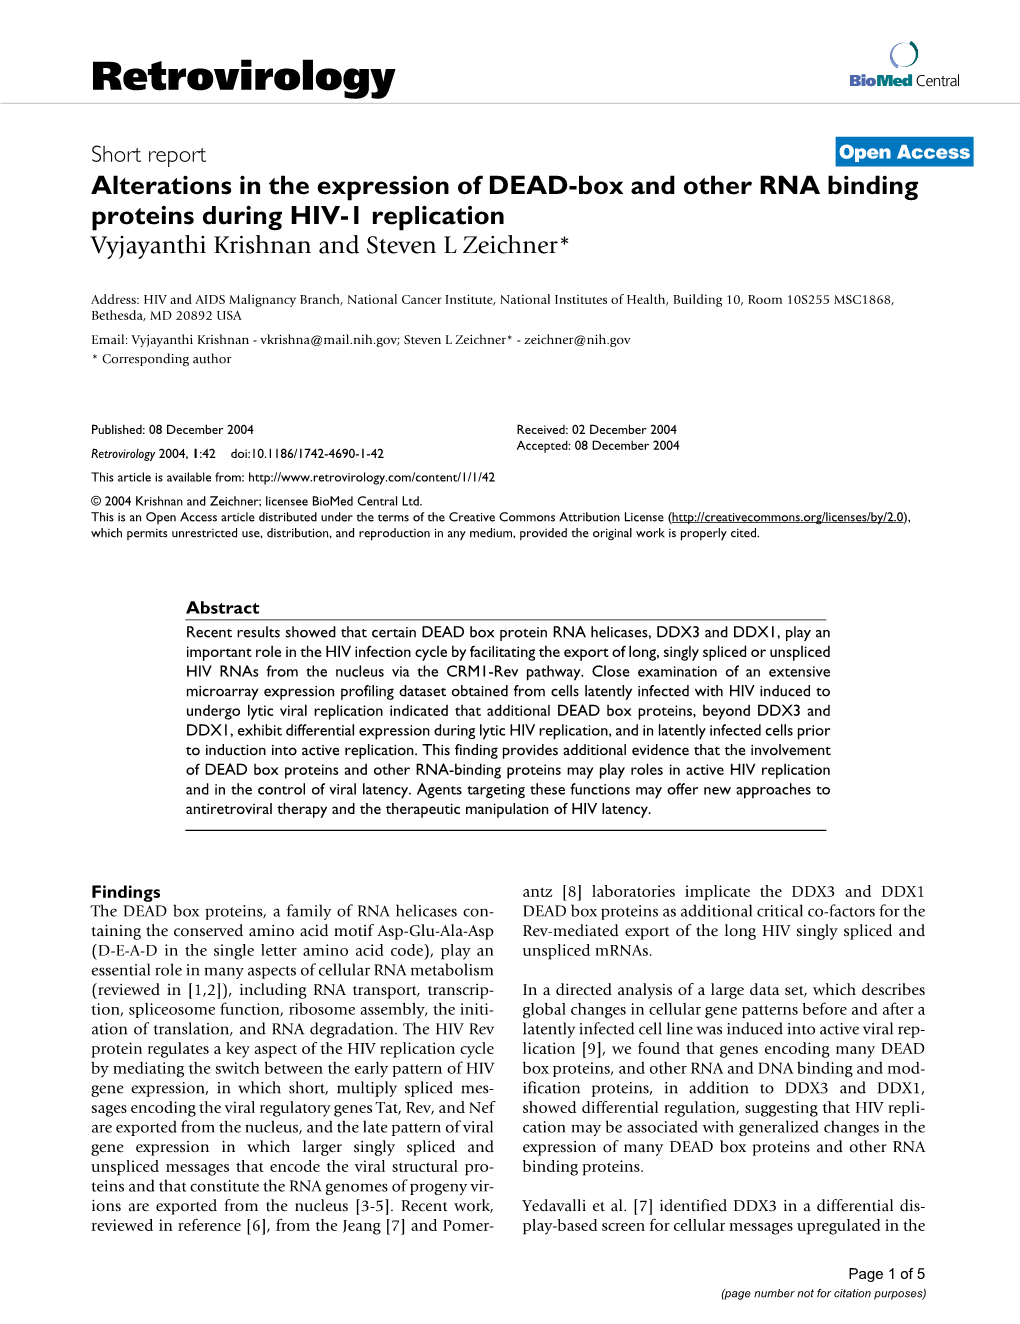 Alterations in the Expression of DEAD-Box and Other RNA Binding Proteins During HIV-1 Replication Vyjayanthi Krishnan and Steven L Zeichner*